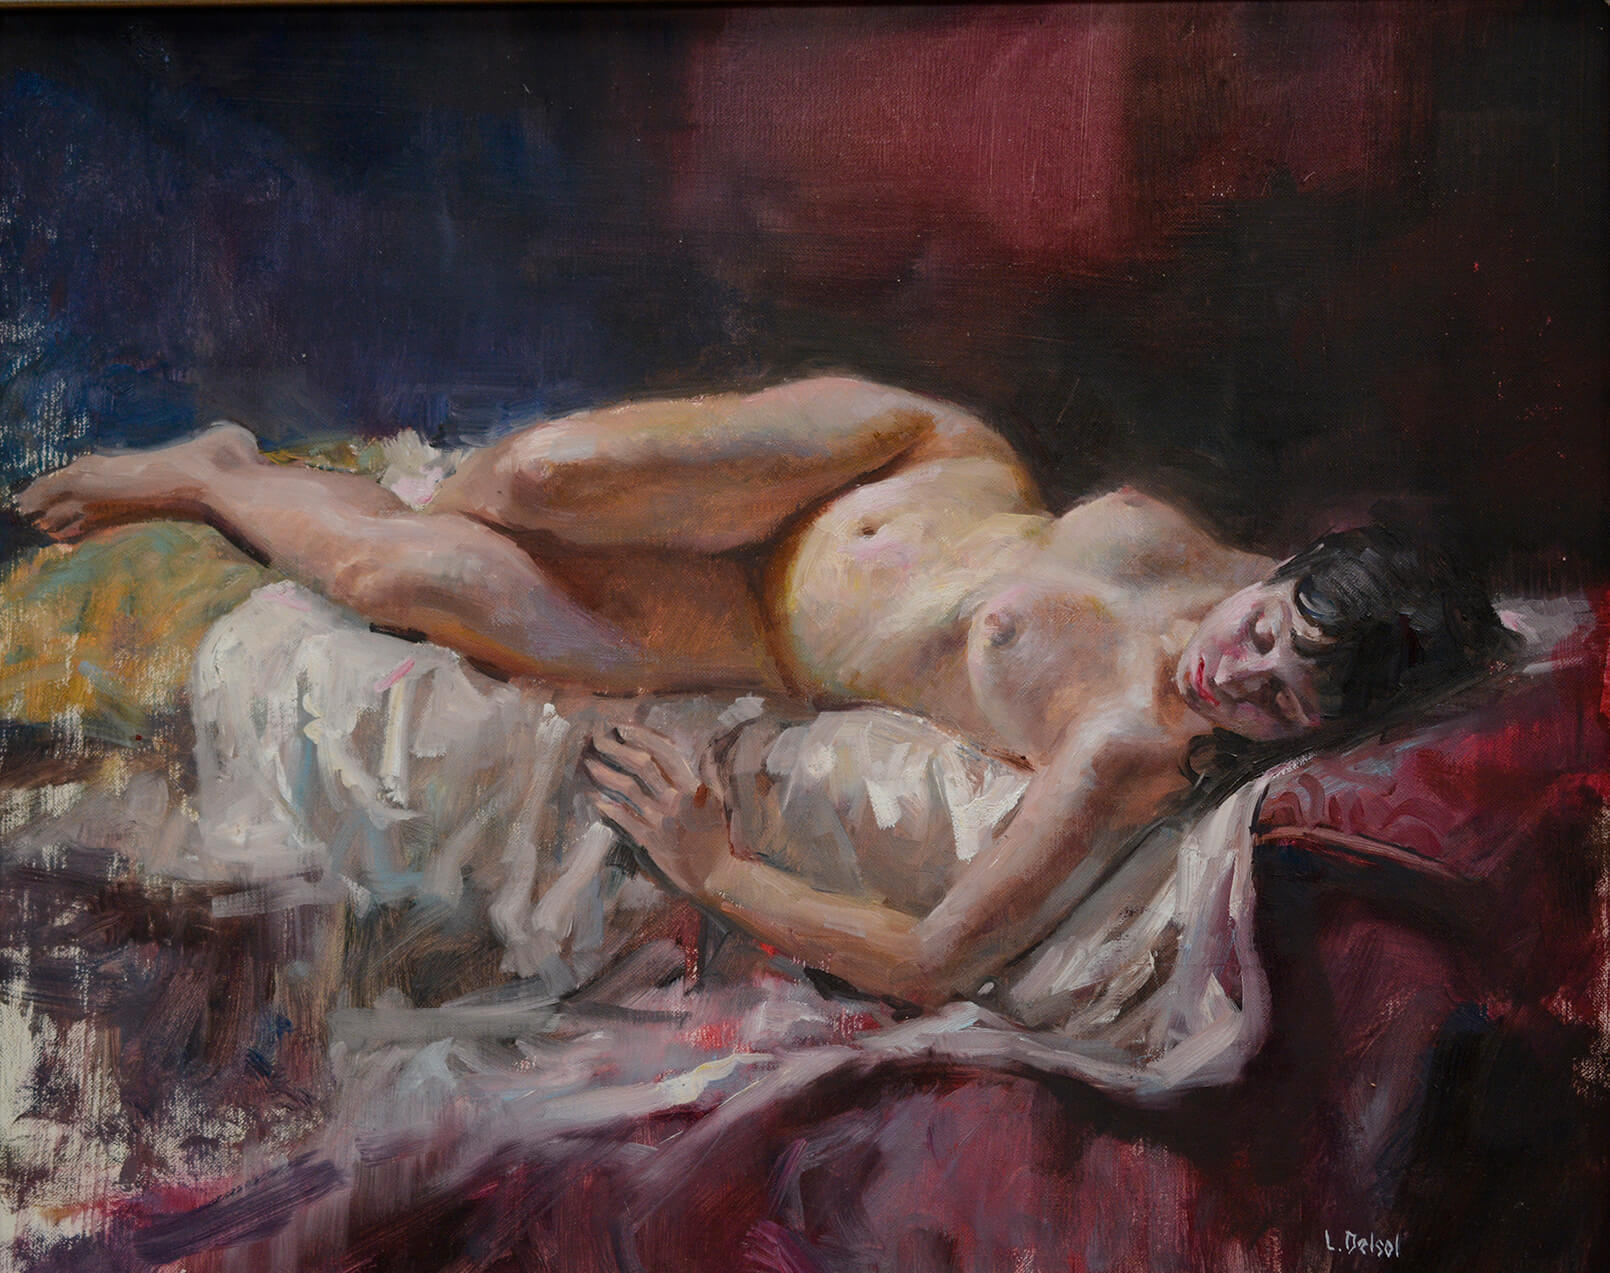 Realistic figurative oil painting of a nude reclining woman in a foreshortened pose